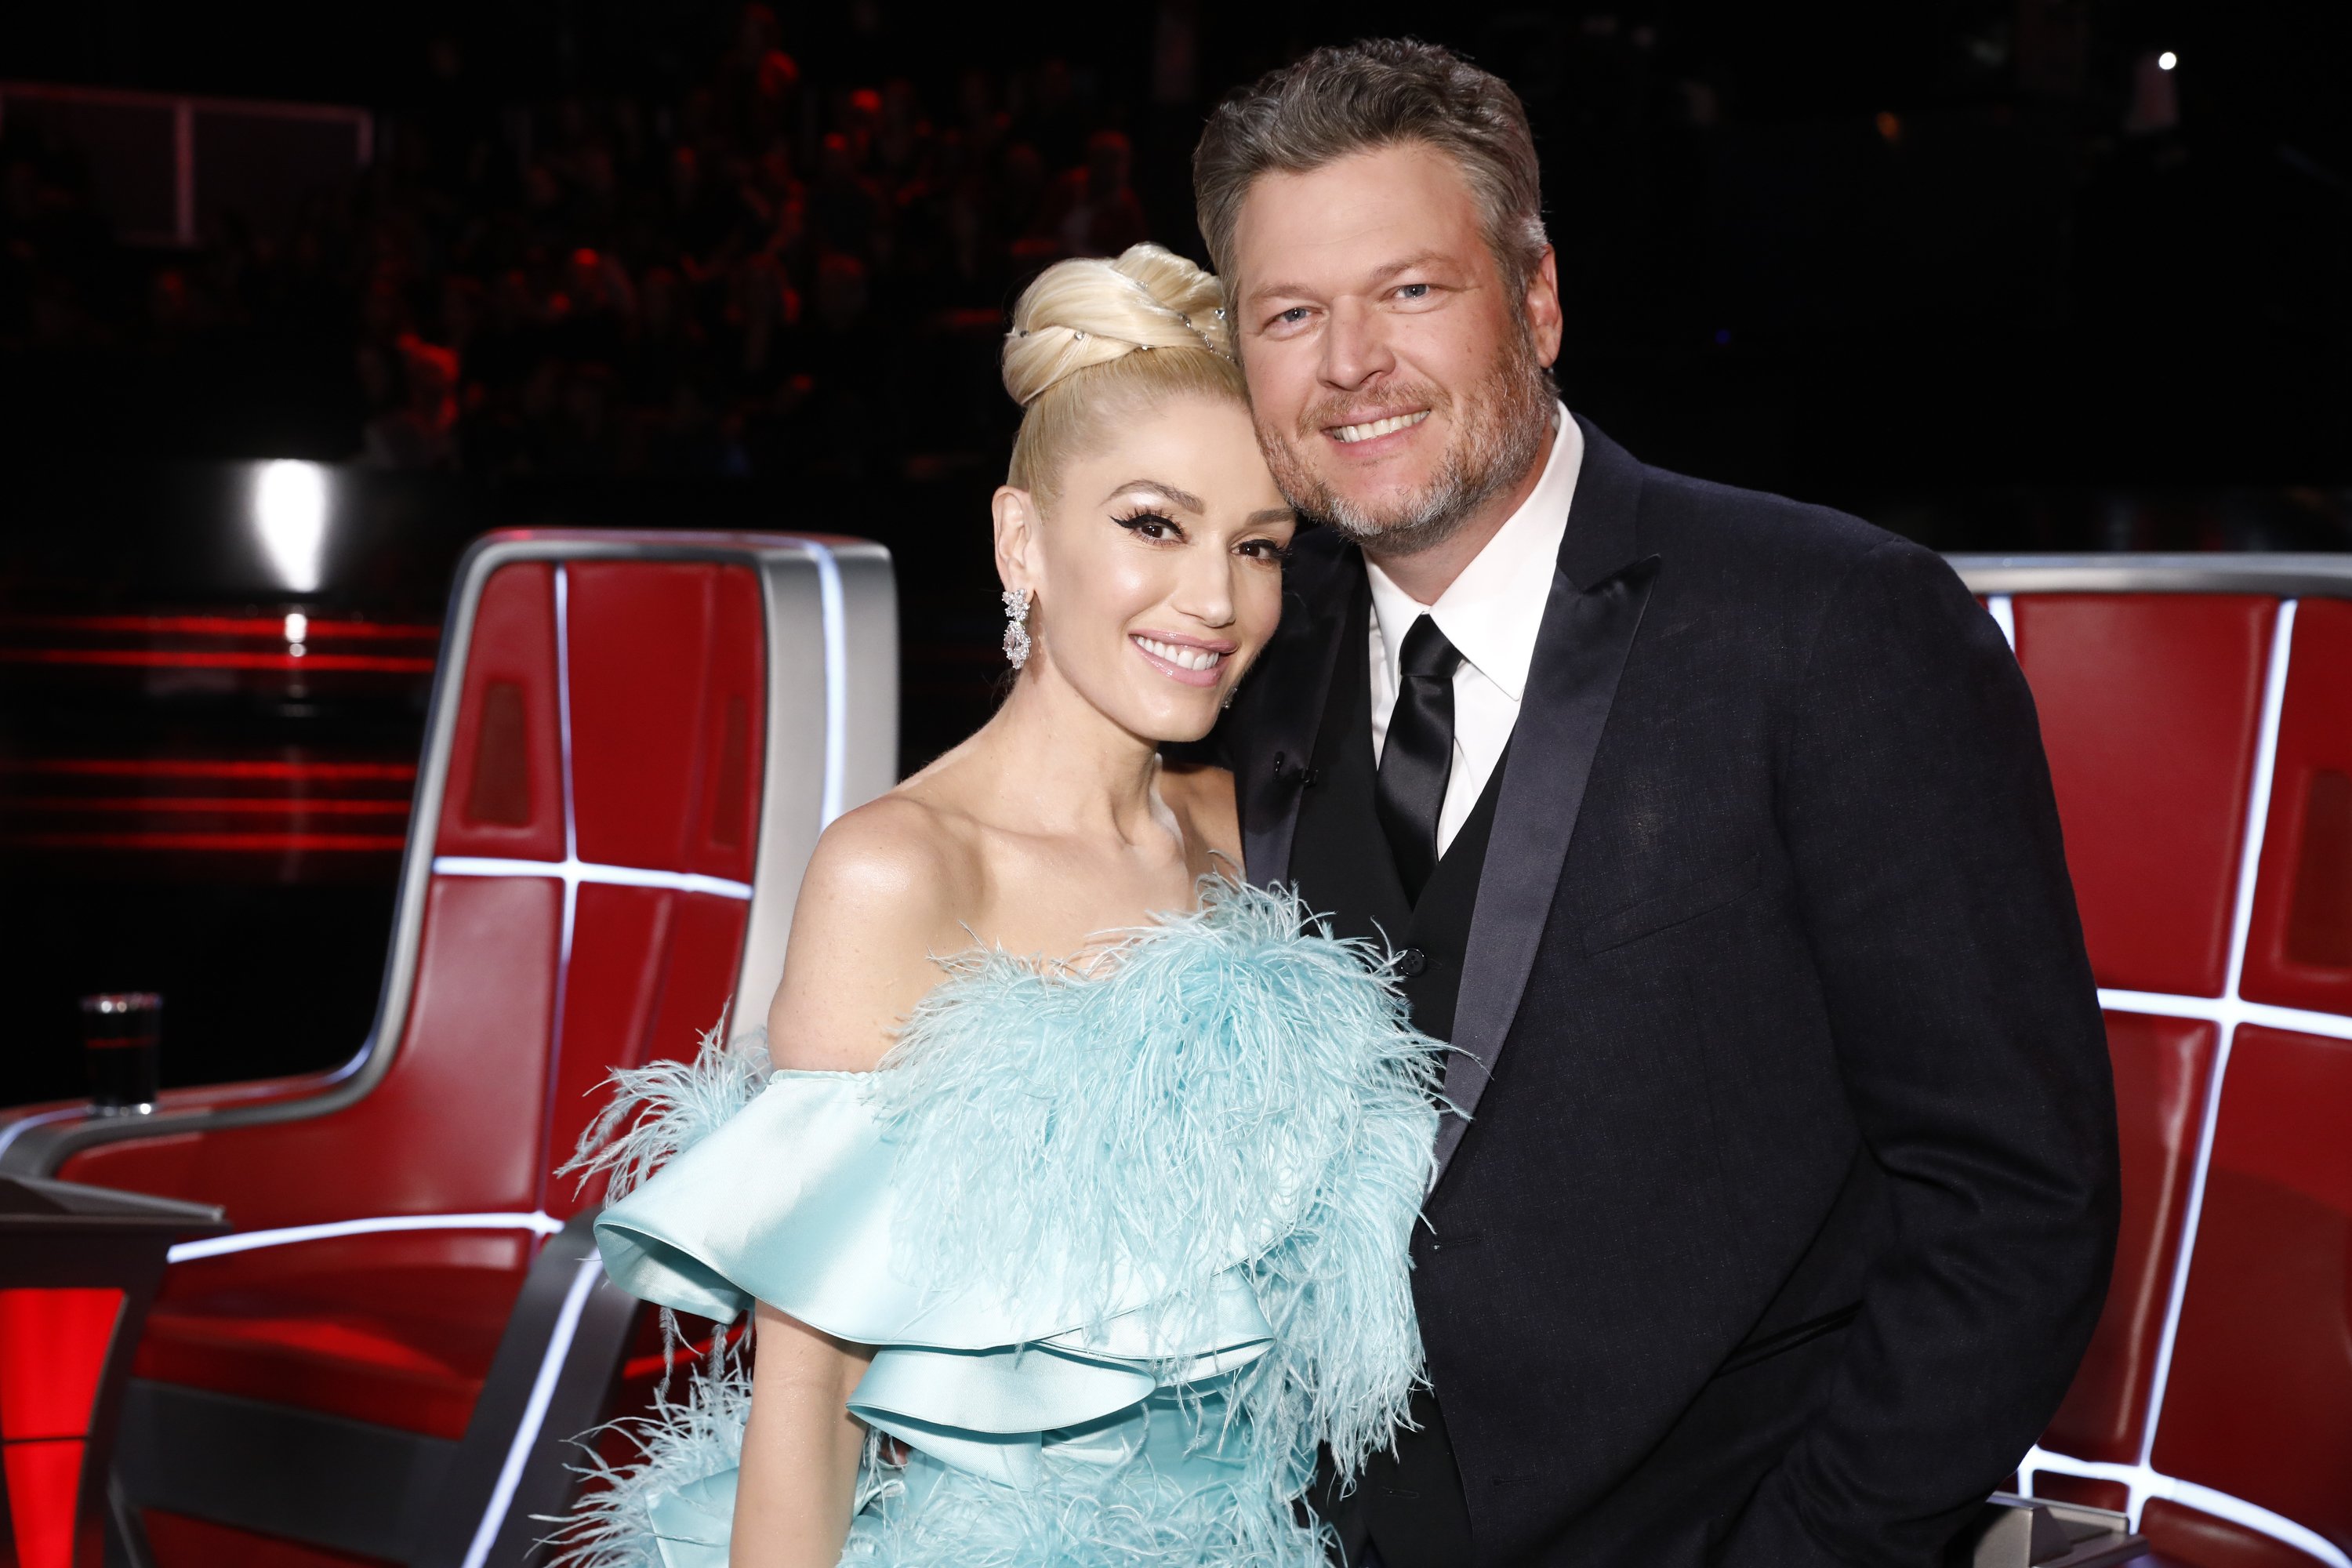 Gwen Stefani and Blake Shelton on "The Voice" in 2019. | Source: Getty Images